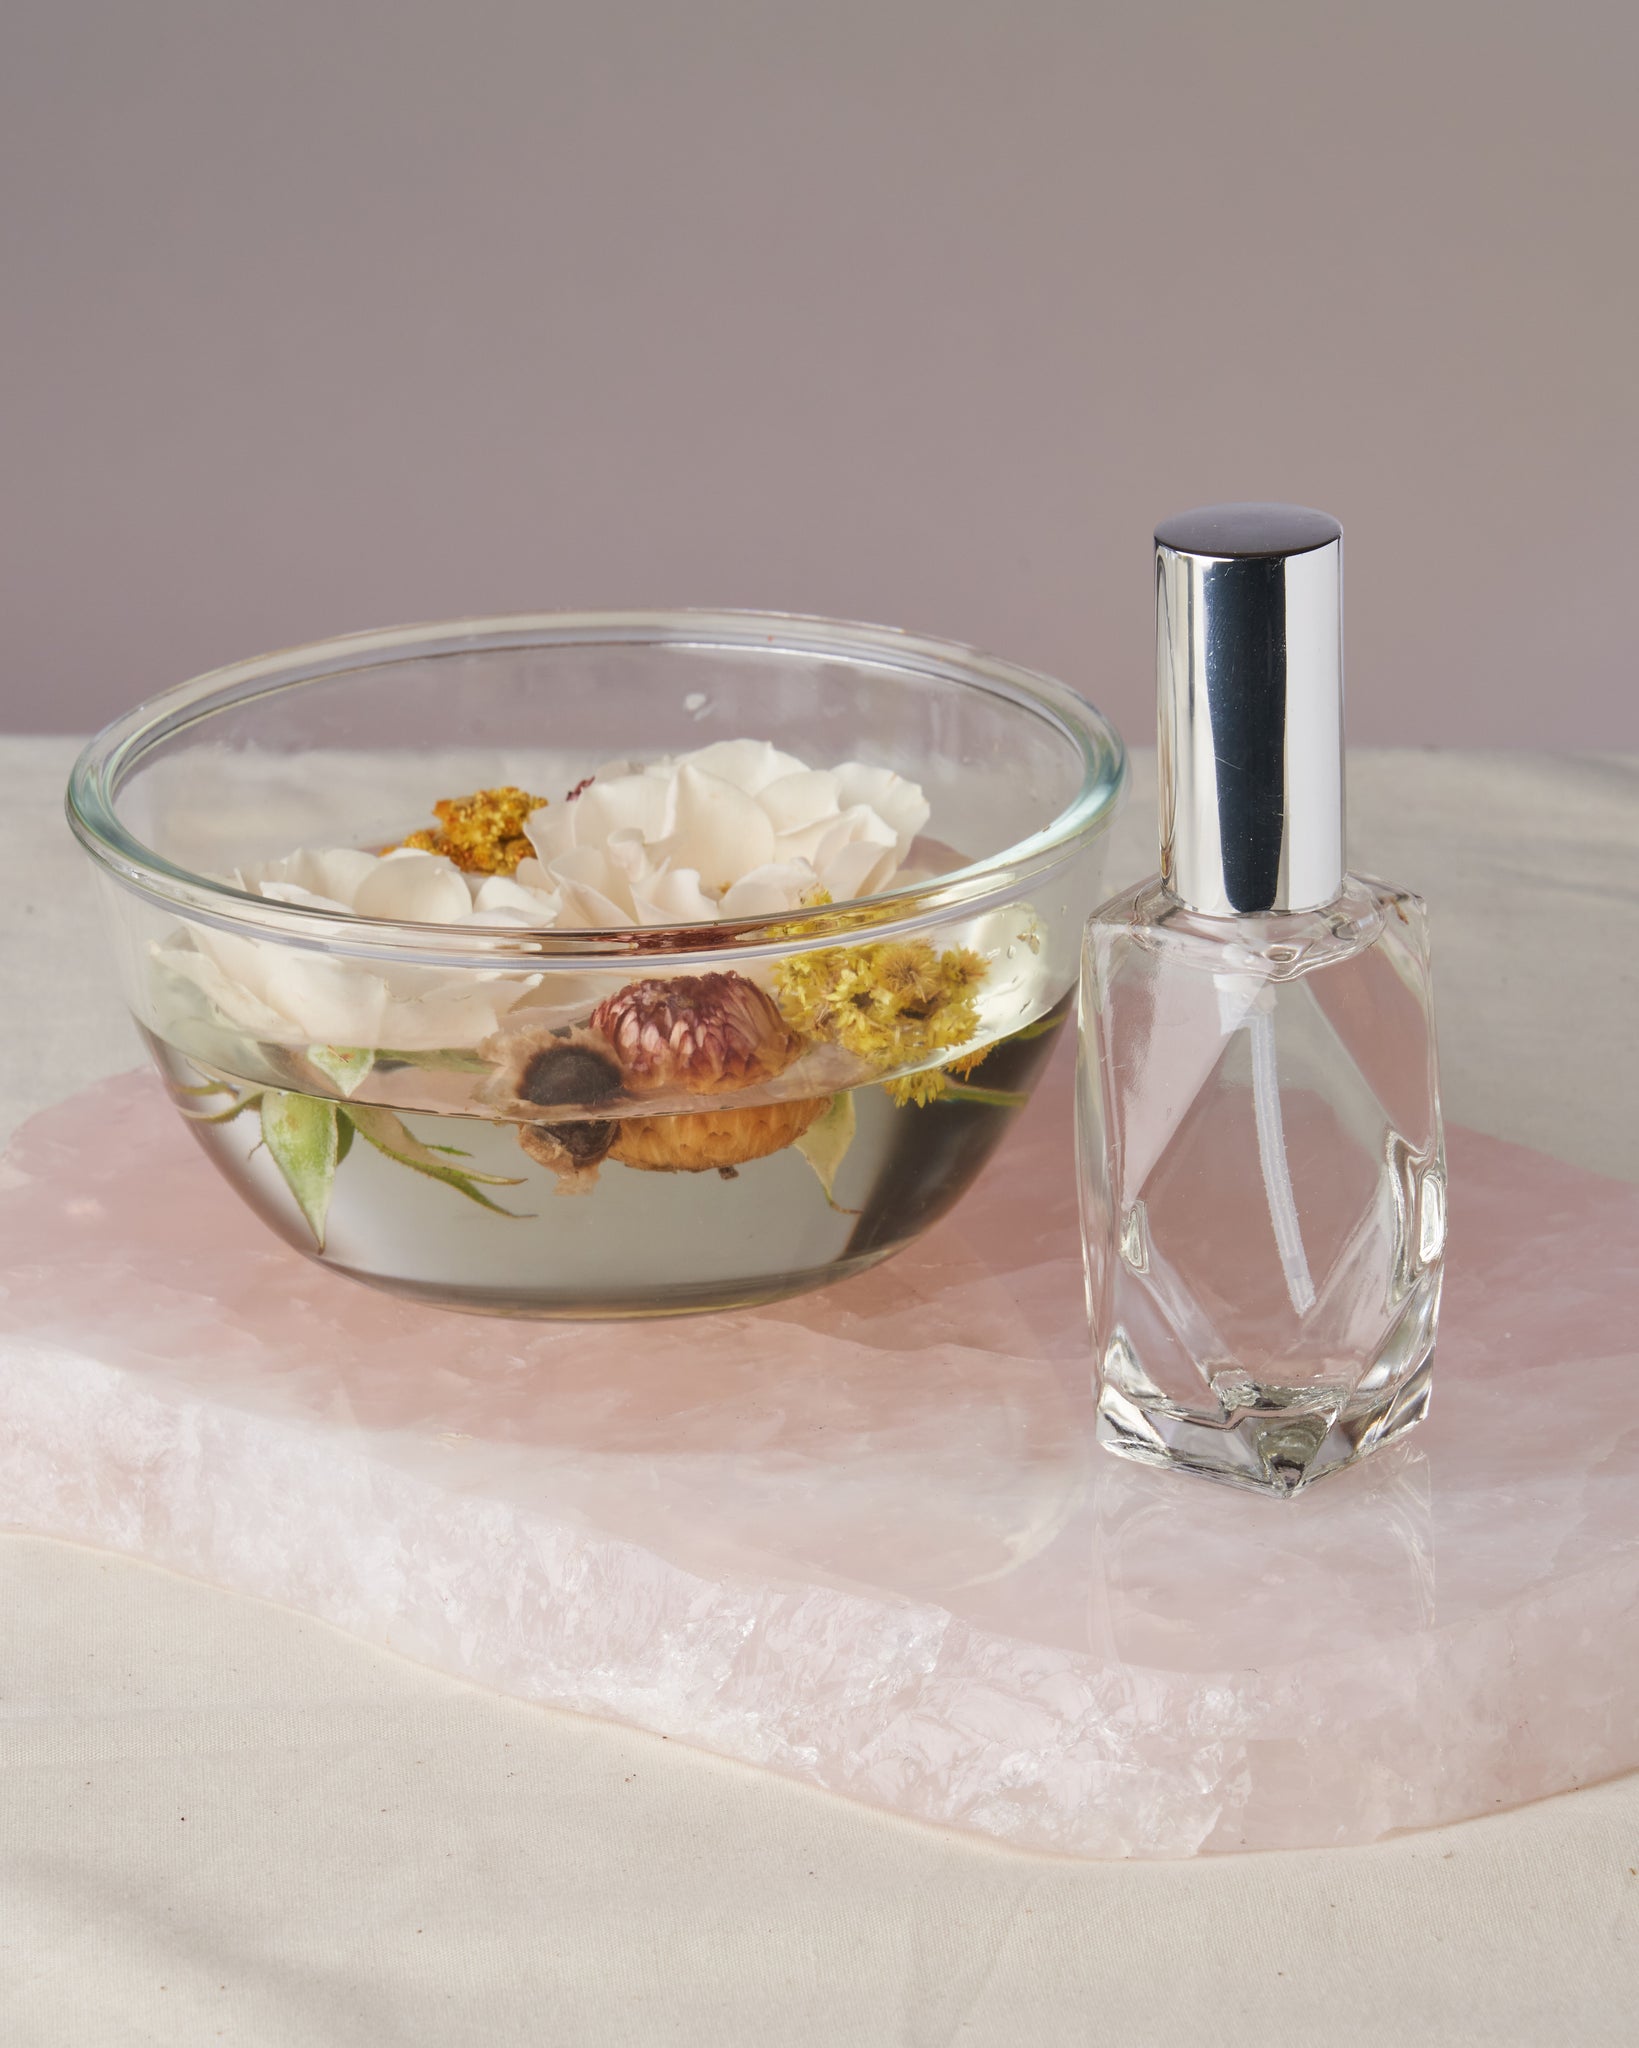 Elevate Your Altar with the Ancestral Altar + Veneration Kit - Embrace Ancestral Wisdom and Connection with Our Floral Essence Made with Immortelle Flower, Roses, Sweetgrass, and Sage